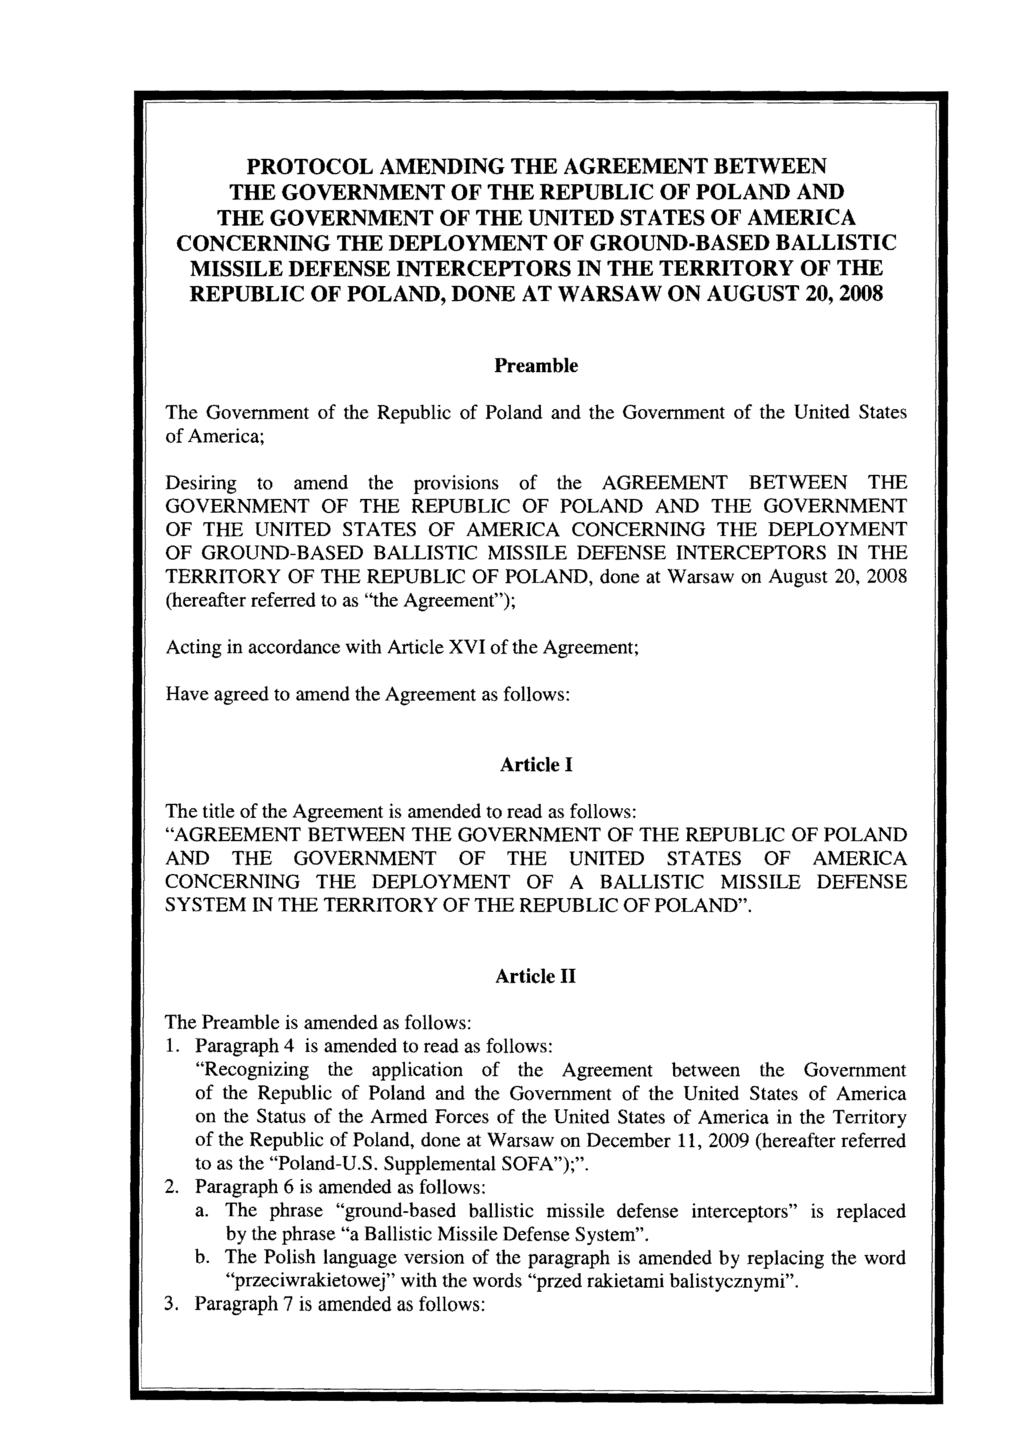 PROTOCOL AMENDING THE AGREEMENT BETWEEN THE GOVERNMENT OF THE REPUBLIC OF POLAND AND THE GOVERNMENT OF THE UNITED STATES OF AMERICA CONCERNING THE DEPLOYMENT OF GROUND BASED BALLISTIC MISSILE DEFENSE